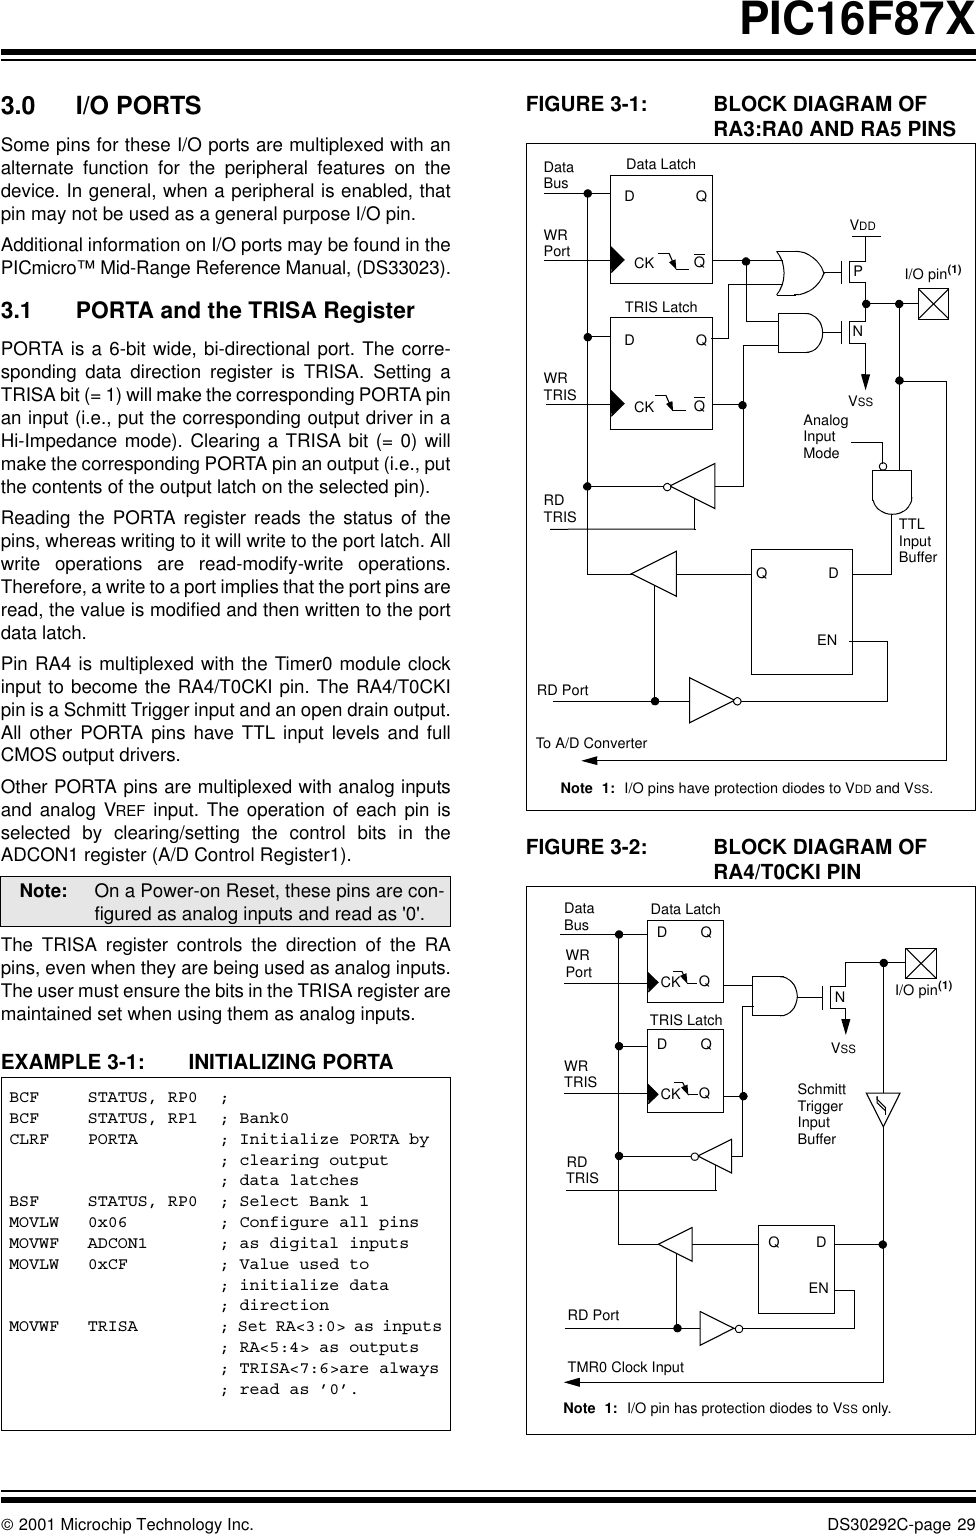  2001 Microchip Technology Inc. DS30292C-page 29PIC16F87X3.0 I/O PORTSSome pins for these I/O ports are multiplexed with analternate function for the peripheral features on thedevice. In general, when a peripheral is enabled, thatpin may not be used as a general purpose I/O pin.Additional information on I/O ports may be found in thePICmicro™ Mid-Range Reference Manual, (DS33023).3.1 PORTA and the TRISA RegisterPORTA is a 6-bit wide, bi-directional port. The corre-sponding data direction register is TRISA. Setting aTRISA bit (= 1) will make the corresponding PORTA pinan input (i.e., put the corresponding output driver in aHi-Impedance mode). Clearing a TRISA bit (= 0) willmake the corresponding PORTA pin an output (i.e., putthe contents of the output latch on the selected pin).Reading the PORTA register reads the status of thepins, whereas writing to it will write to the port latch. Allwrite operations are read-modify-write operations.Therefore, a write to a port implies that the port pins areread, the value is modified and then written to the portdata latch.Pin RA4 is multiplexed with the Timer0 module clockinput to become the RA4/T0CKI pin. The RA4/T0CKIpin is a Schmitt Trigger input and an open drain output.All other PORTA pins have TTL input levels and fullCMOS output drivers.Other PORTA pins are multiplexed with analog inputsand analog VREF input. The operation of each pin isselected by clearing/setting the control bits in theADCON1 register (A/D Control Register1).   The TRISA register controls the direction of the RApins, even when they are being used as analog inputs.The user must ensure the bits in the TRISA register aremaintained set when using them as analog inputs. EXAMPLE 3-1: INITIALIZING PORTAFIGURE 3-1: BLOCK DIAGRAM OF RA3:RA0 AND RA5 PINS  FIGURE 3-2: BLOCK DIAGRAM OF RA4/T0CKI PIN    Note: On a Power-on Reset, these pins are con-figured as analog inputs and read as &apos;0&apos;.BCF STATUS, RP0 ;BCF STATUS, RP1 ; Bank0CLRF PORTA ; Initialize PORTA by; clearing output; data latchesBSF STATUS, RP0 ; Select Bank 1MOVLW 0x06 ; Configure all pinsMOVWF ADCON1 ; as digital inputsMOVLW 0xCF ; Value used to ; initialize data ; directionMOVWF TRISA ; Set RA&lt;3:0&gt; as inputs; RA&lt;5:4&gt; as outputs; TRISA&lt;7:6&gt;are always; read as ’0’.DataBusQDQCKQDQCKQDENPNWRPortWRTRISData LatchTRIS LatchRD RD PortVSSVDDI/O pin(1)Note 1: I/O pins have protection diodes to VDD and VSS.AnalogInputModeTTLInputBufferTo A/D ConverterTRISDataBusWRPortWRTRISRD PortData LatchTRIS LatchRD SchmittTriggerInputBufferNVSSI/O pin(1)TMR0 Clock InputQDQCKQDQCKENQDENNote 1: I/O pin has protection diodes to VSS only.TRIS